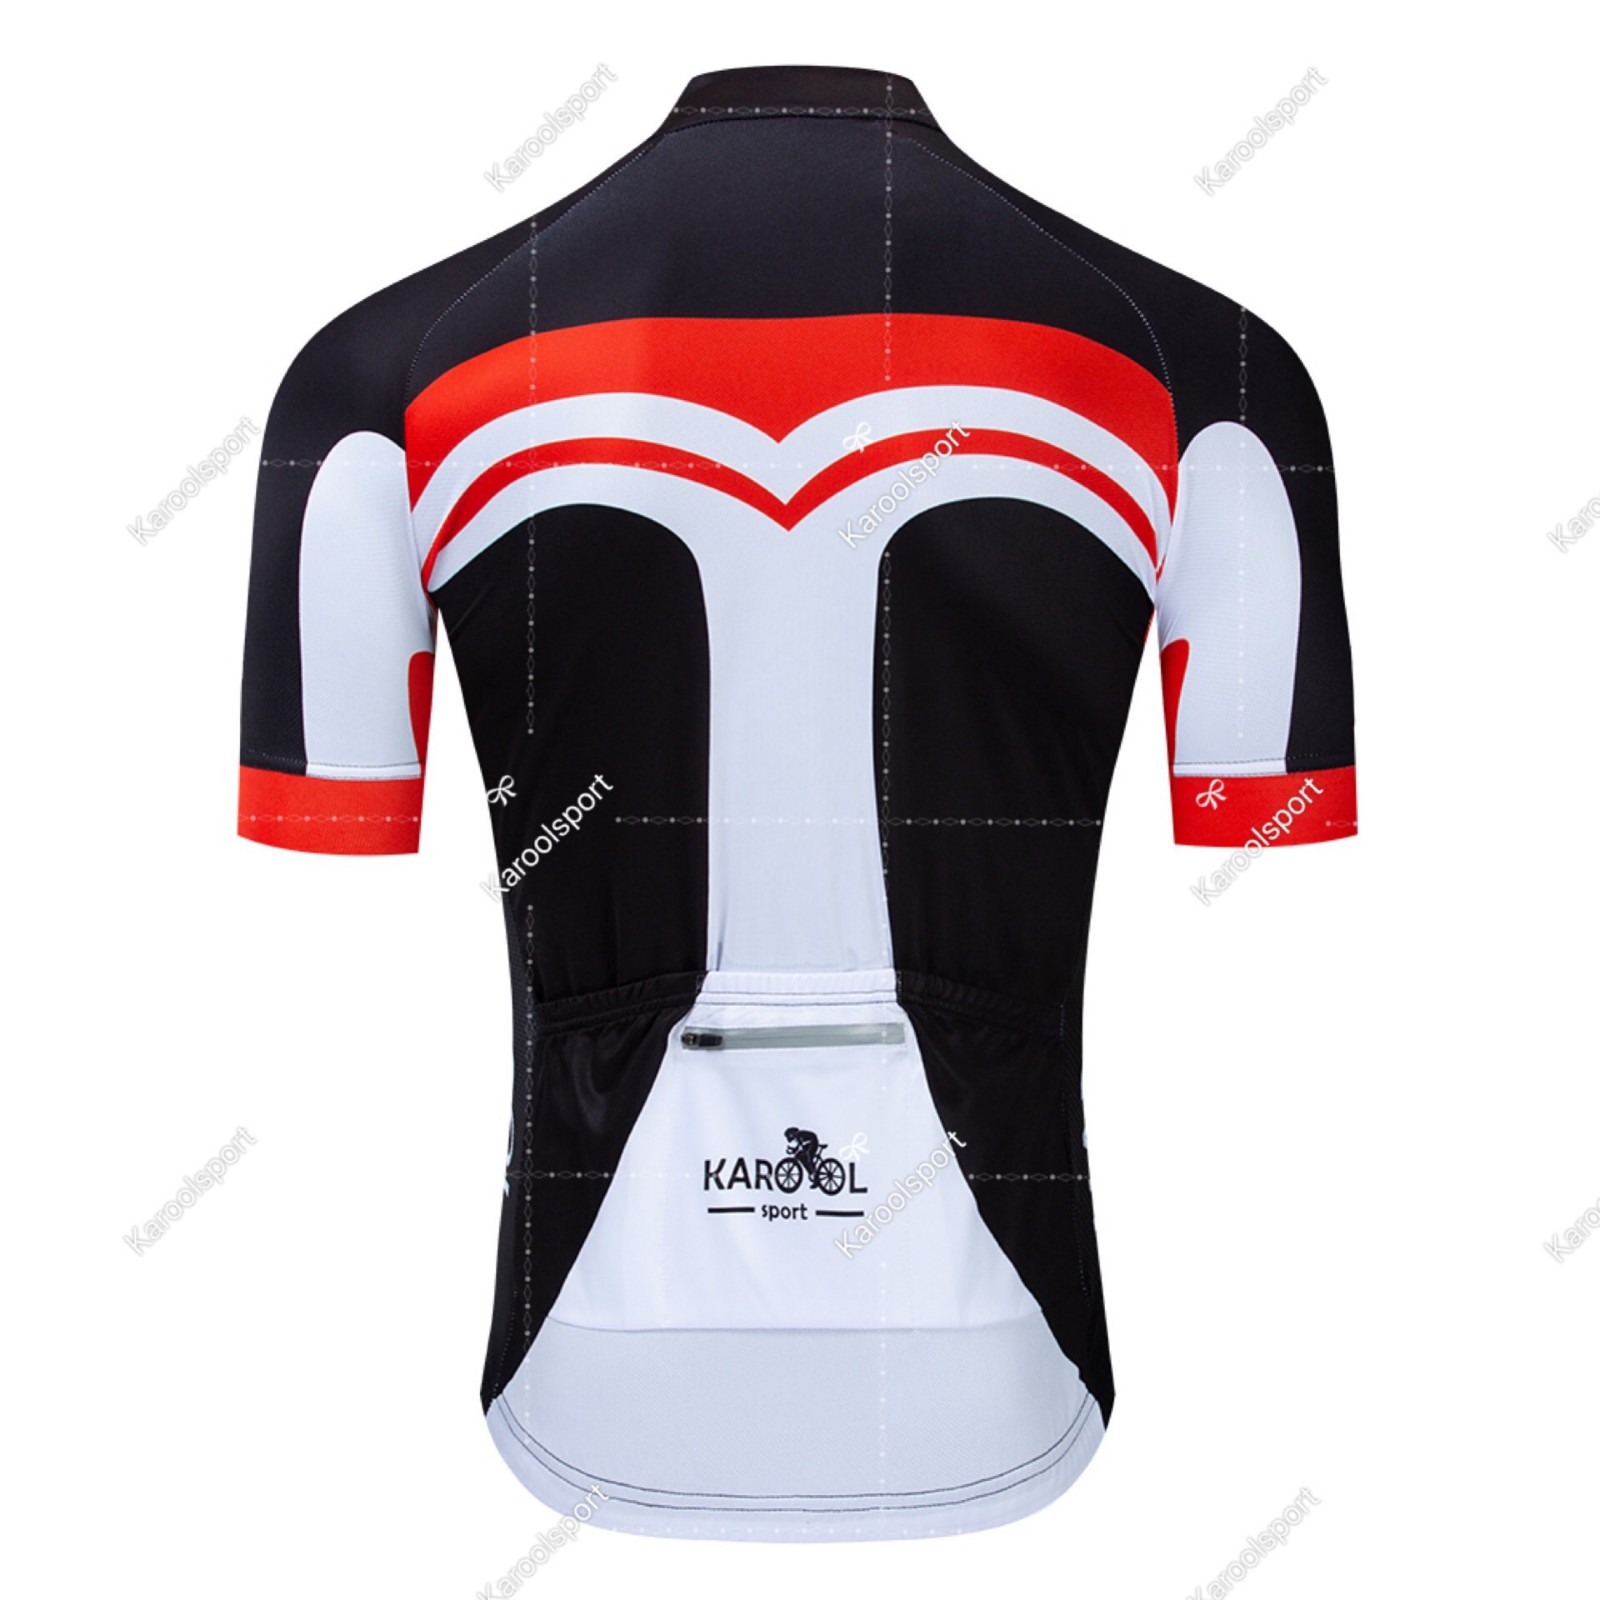 Karool cool cycling jerseys manufacturer for sporting-3